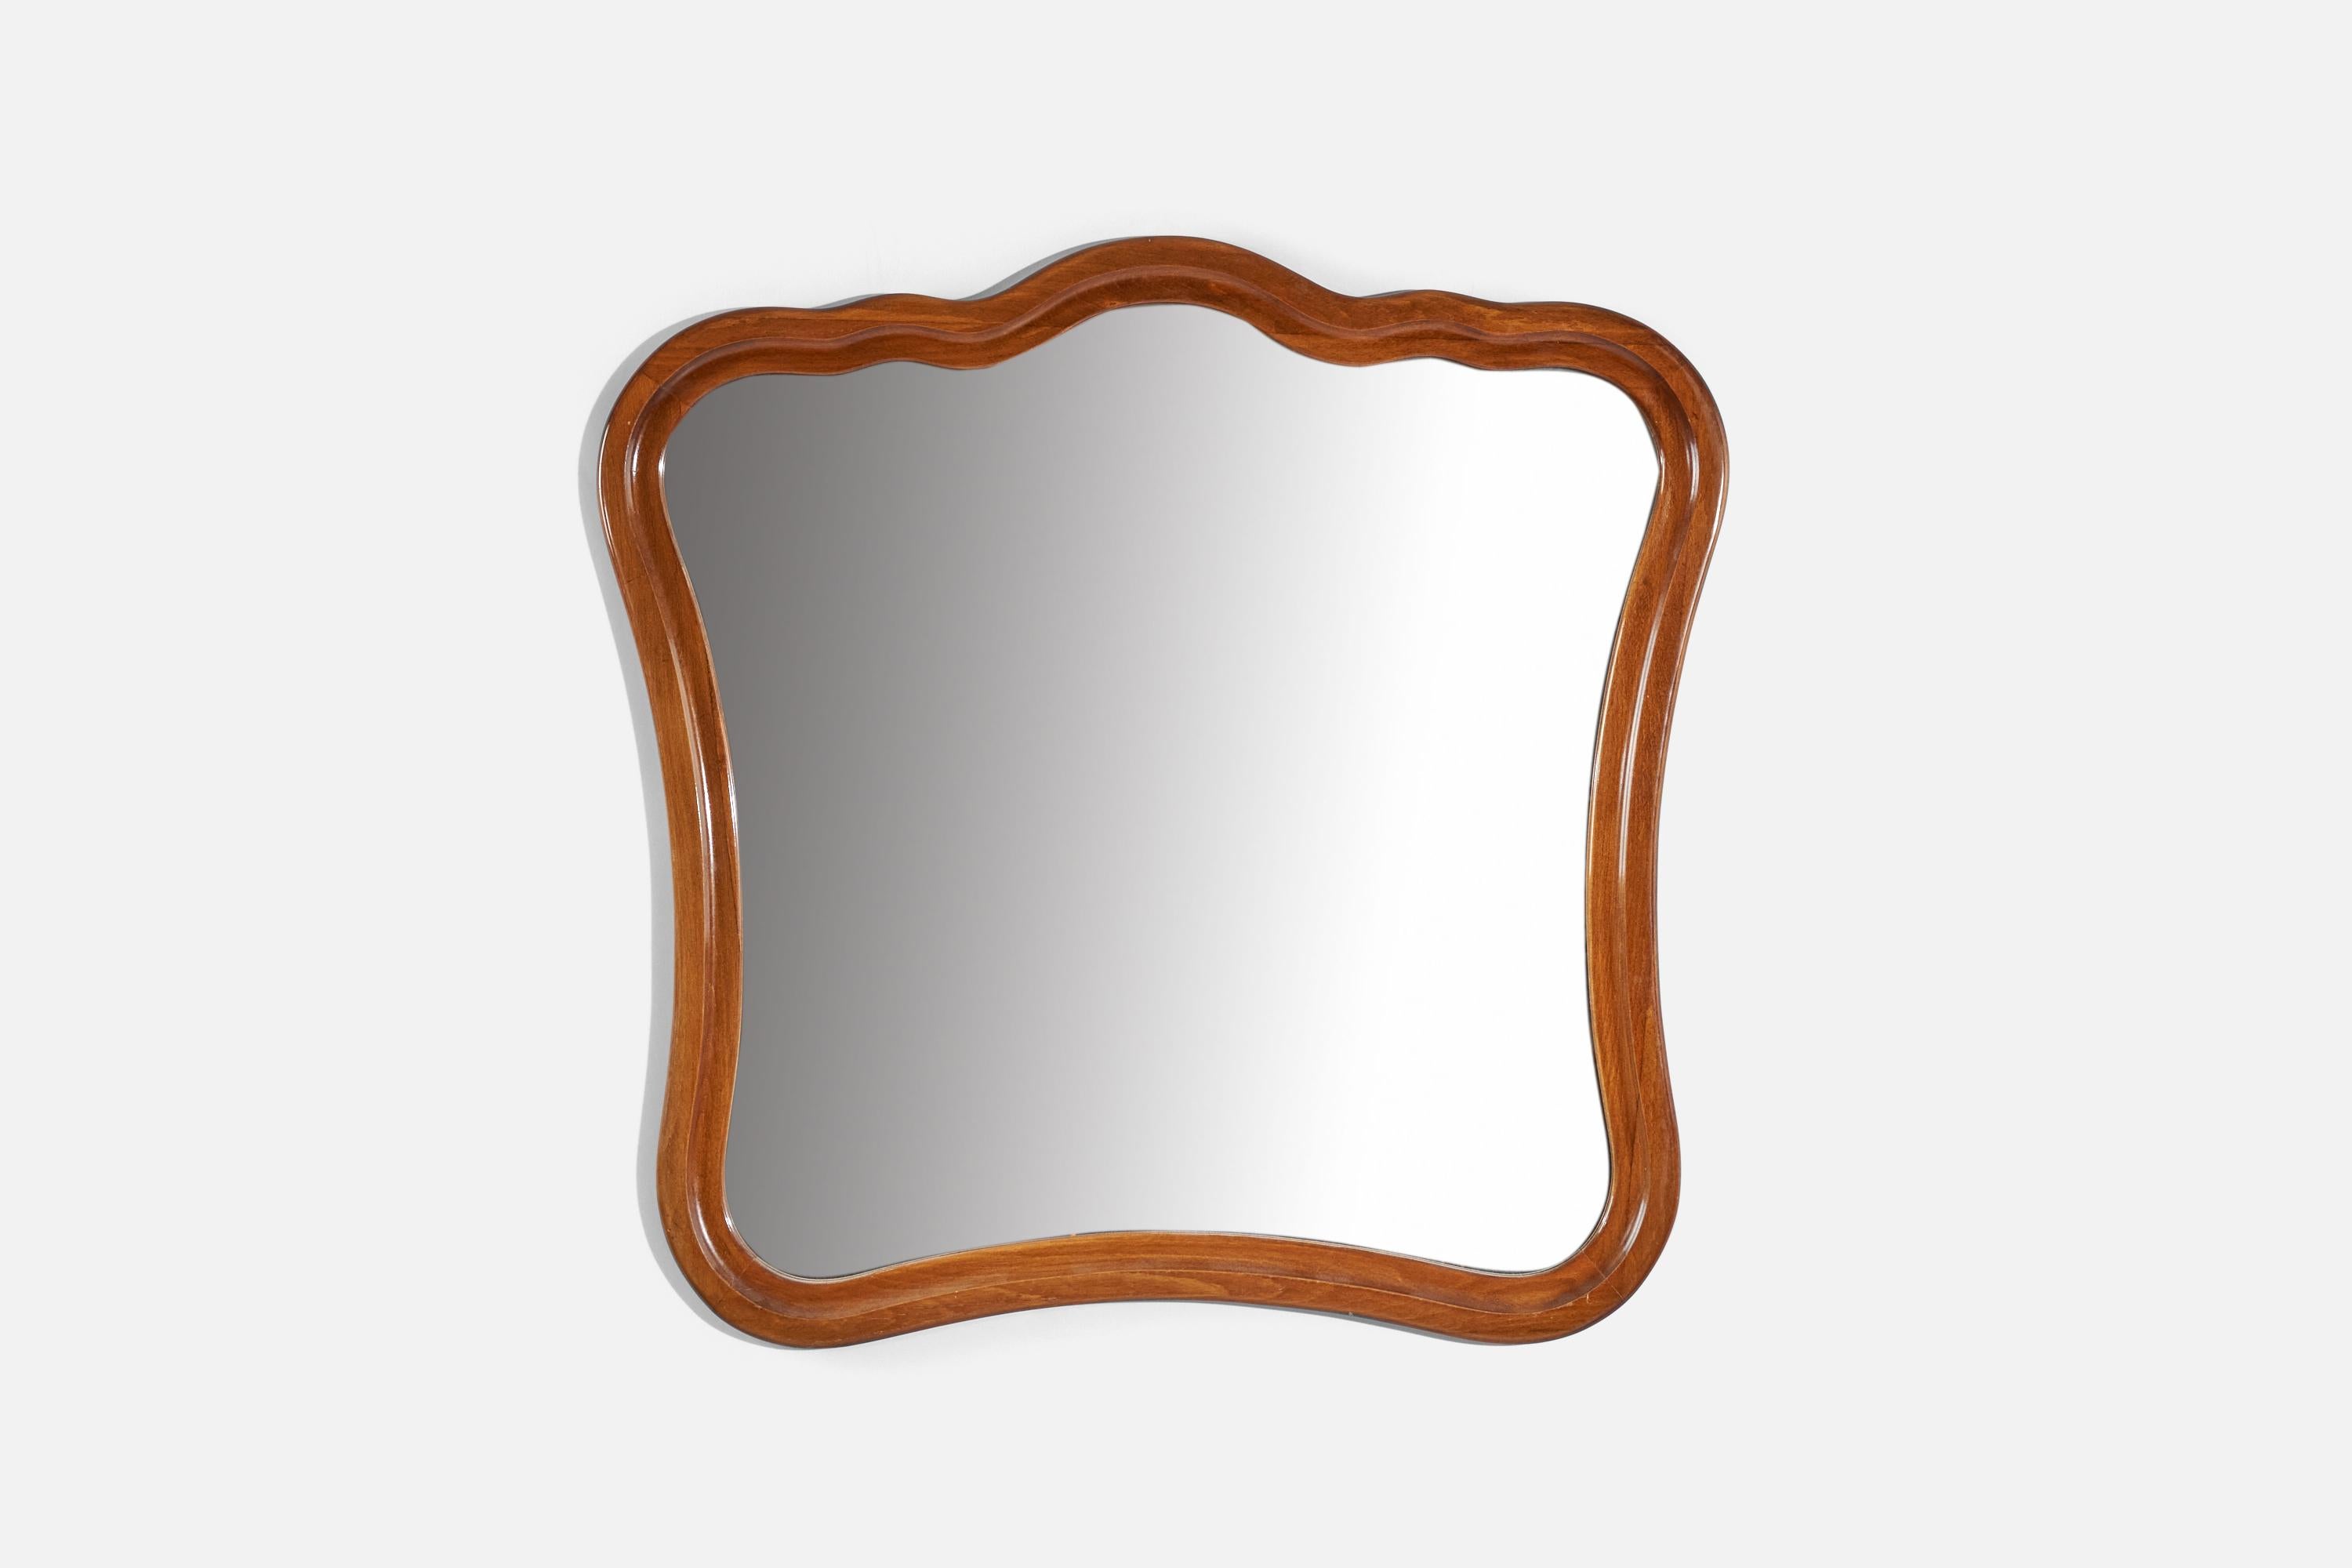 A solid wood frame mirror, designed and produced in Sweden, c. 1940s.